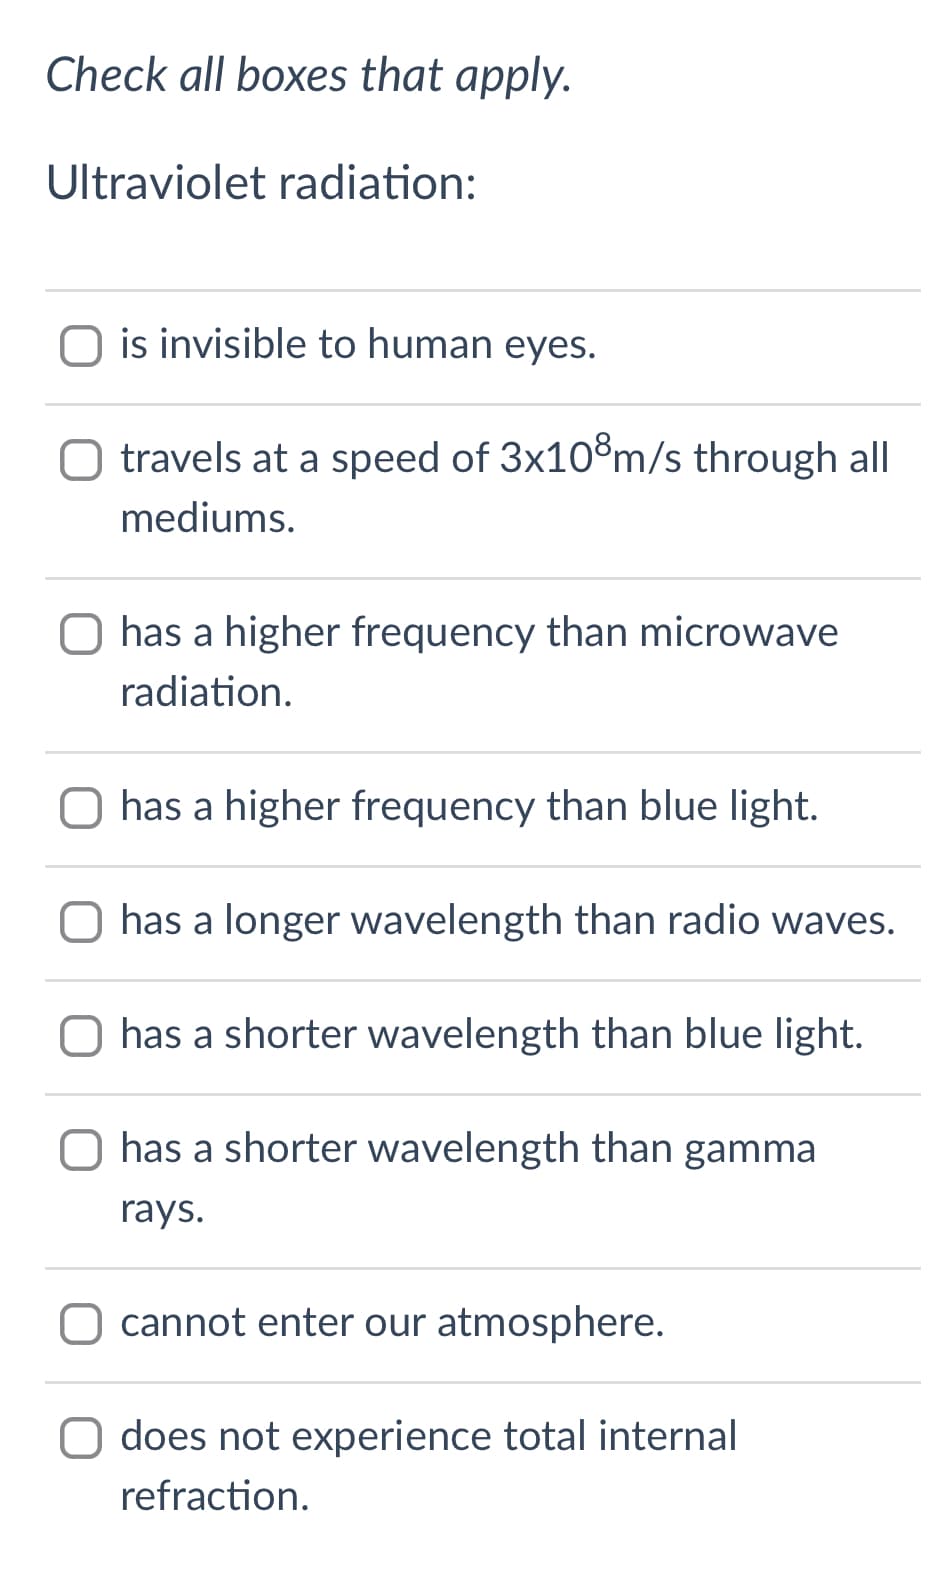 Check all boxes that apply.
Ultraviolet radiation:
is invisible to human eyes.
O travels at a speed of 3x10®m/s through all
mediums.
O has a higher frequency than microwave
radiation.
O has a higher frequency than blue light.
O has a longer wavelength than radio waves.
O has a shorter wavelength than blue light.
O has a shorter wavelength than gamma
rays.
O cannot enter our atmosphere.
does not experience total internal
refraction.
